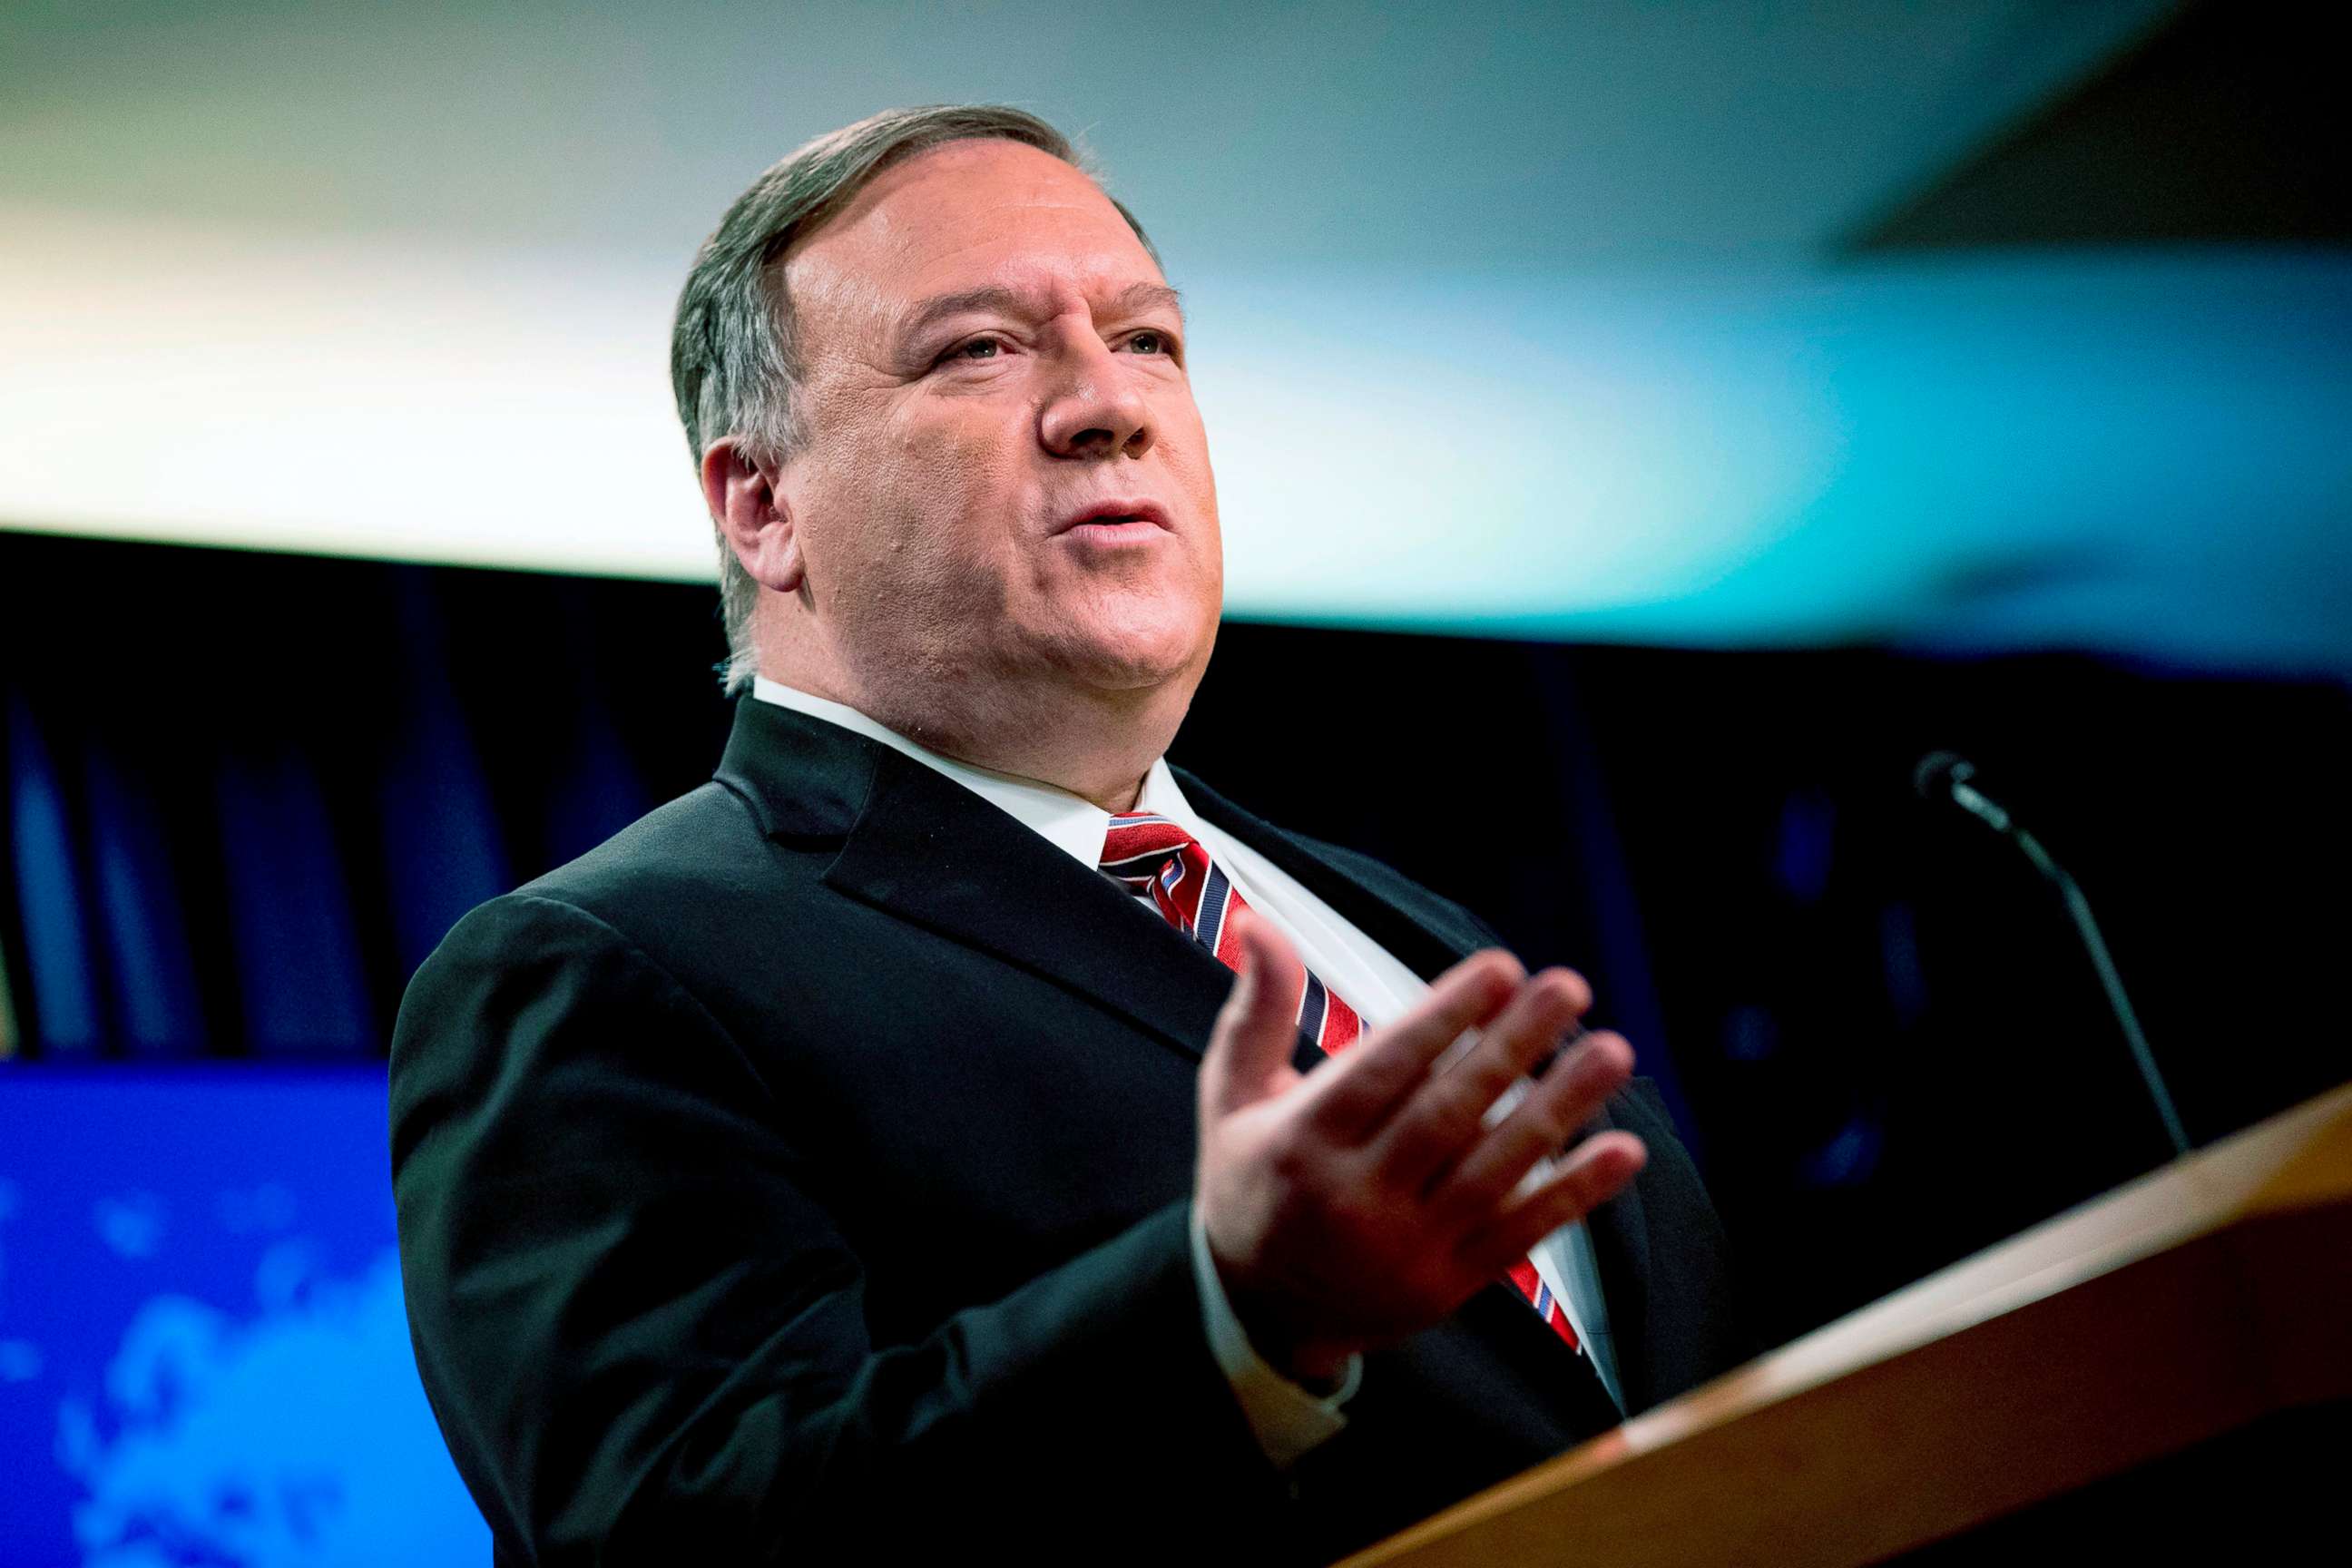 PHOTO: Secretary of State Mike Pompeo speaks at a news conference at the State Department on April 29, 2020, in Washington.